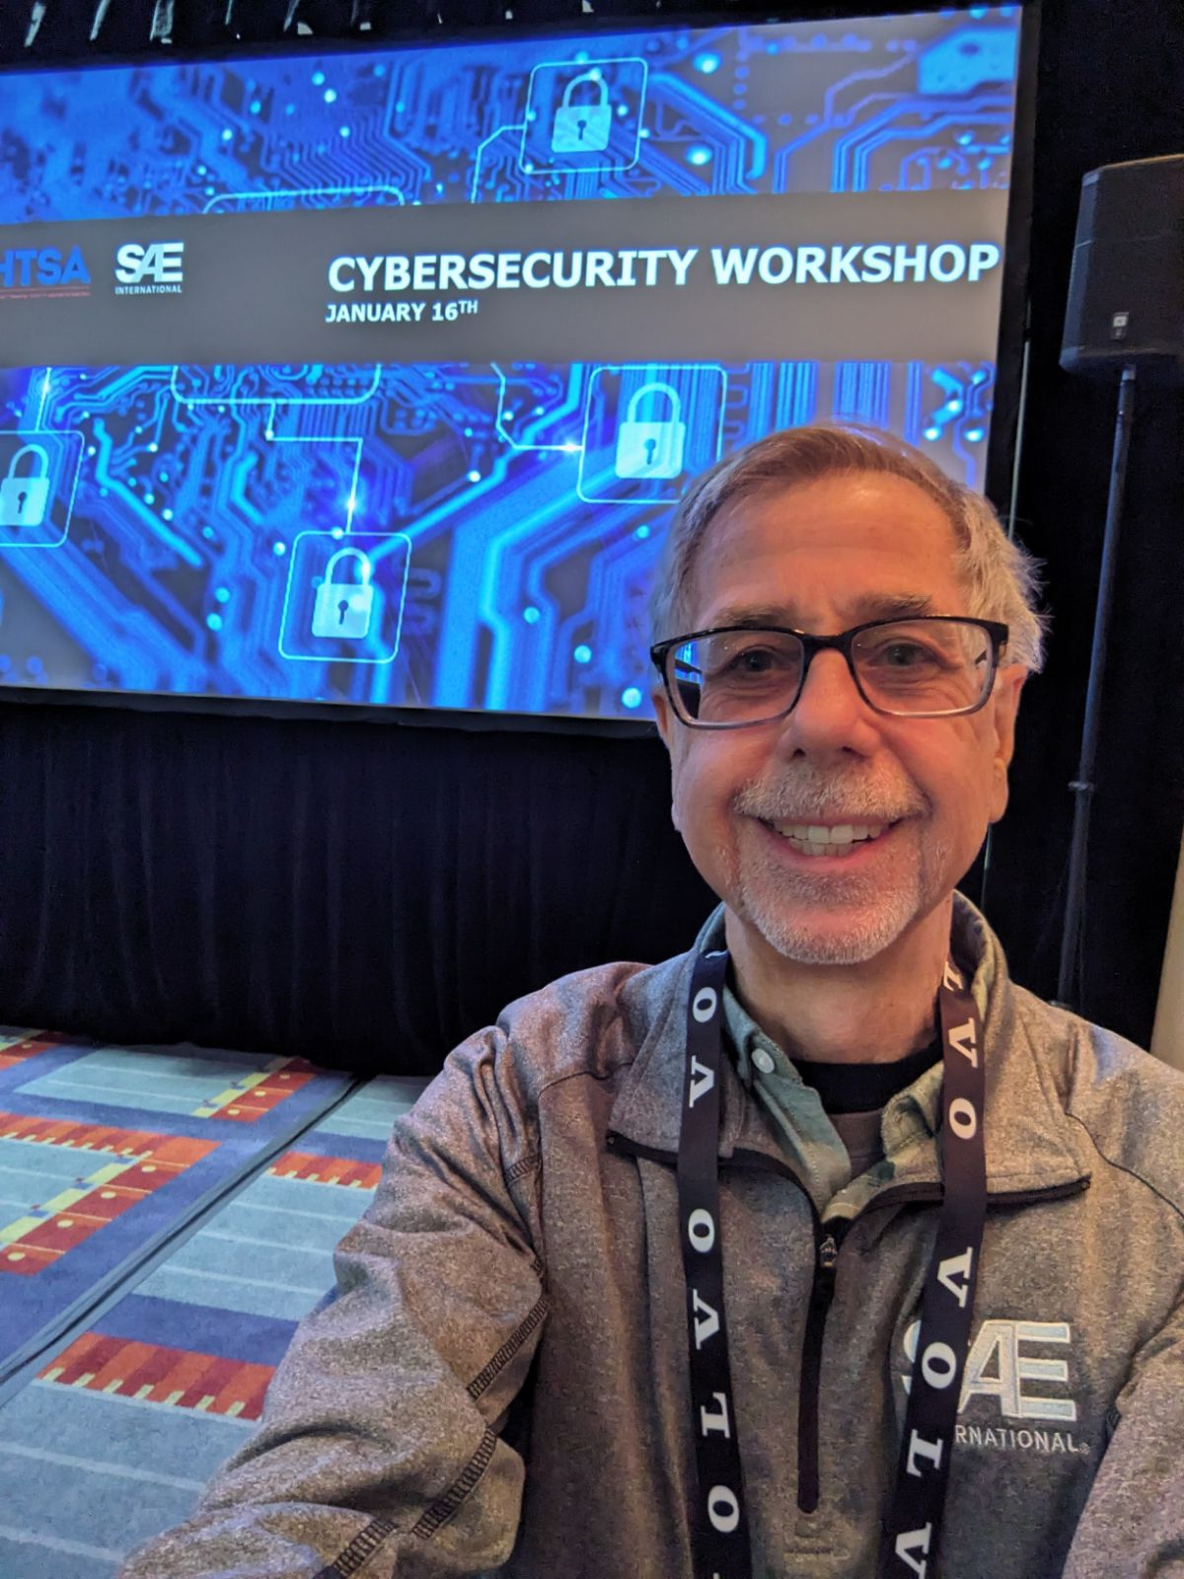 Mark Zachos poses in front of the Cybersecurity workshop graphic at SAE.